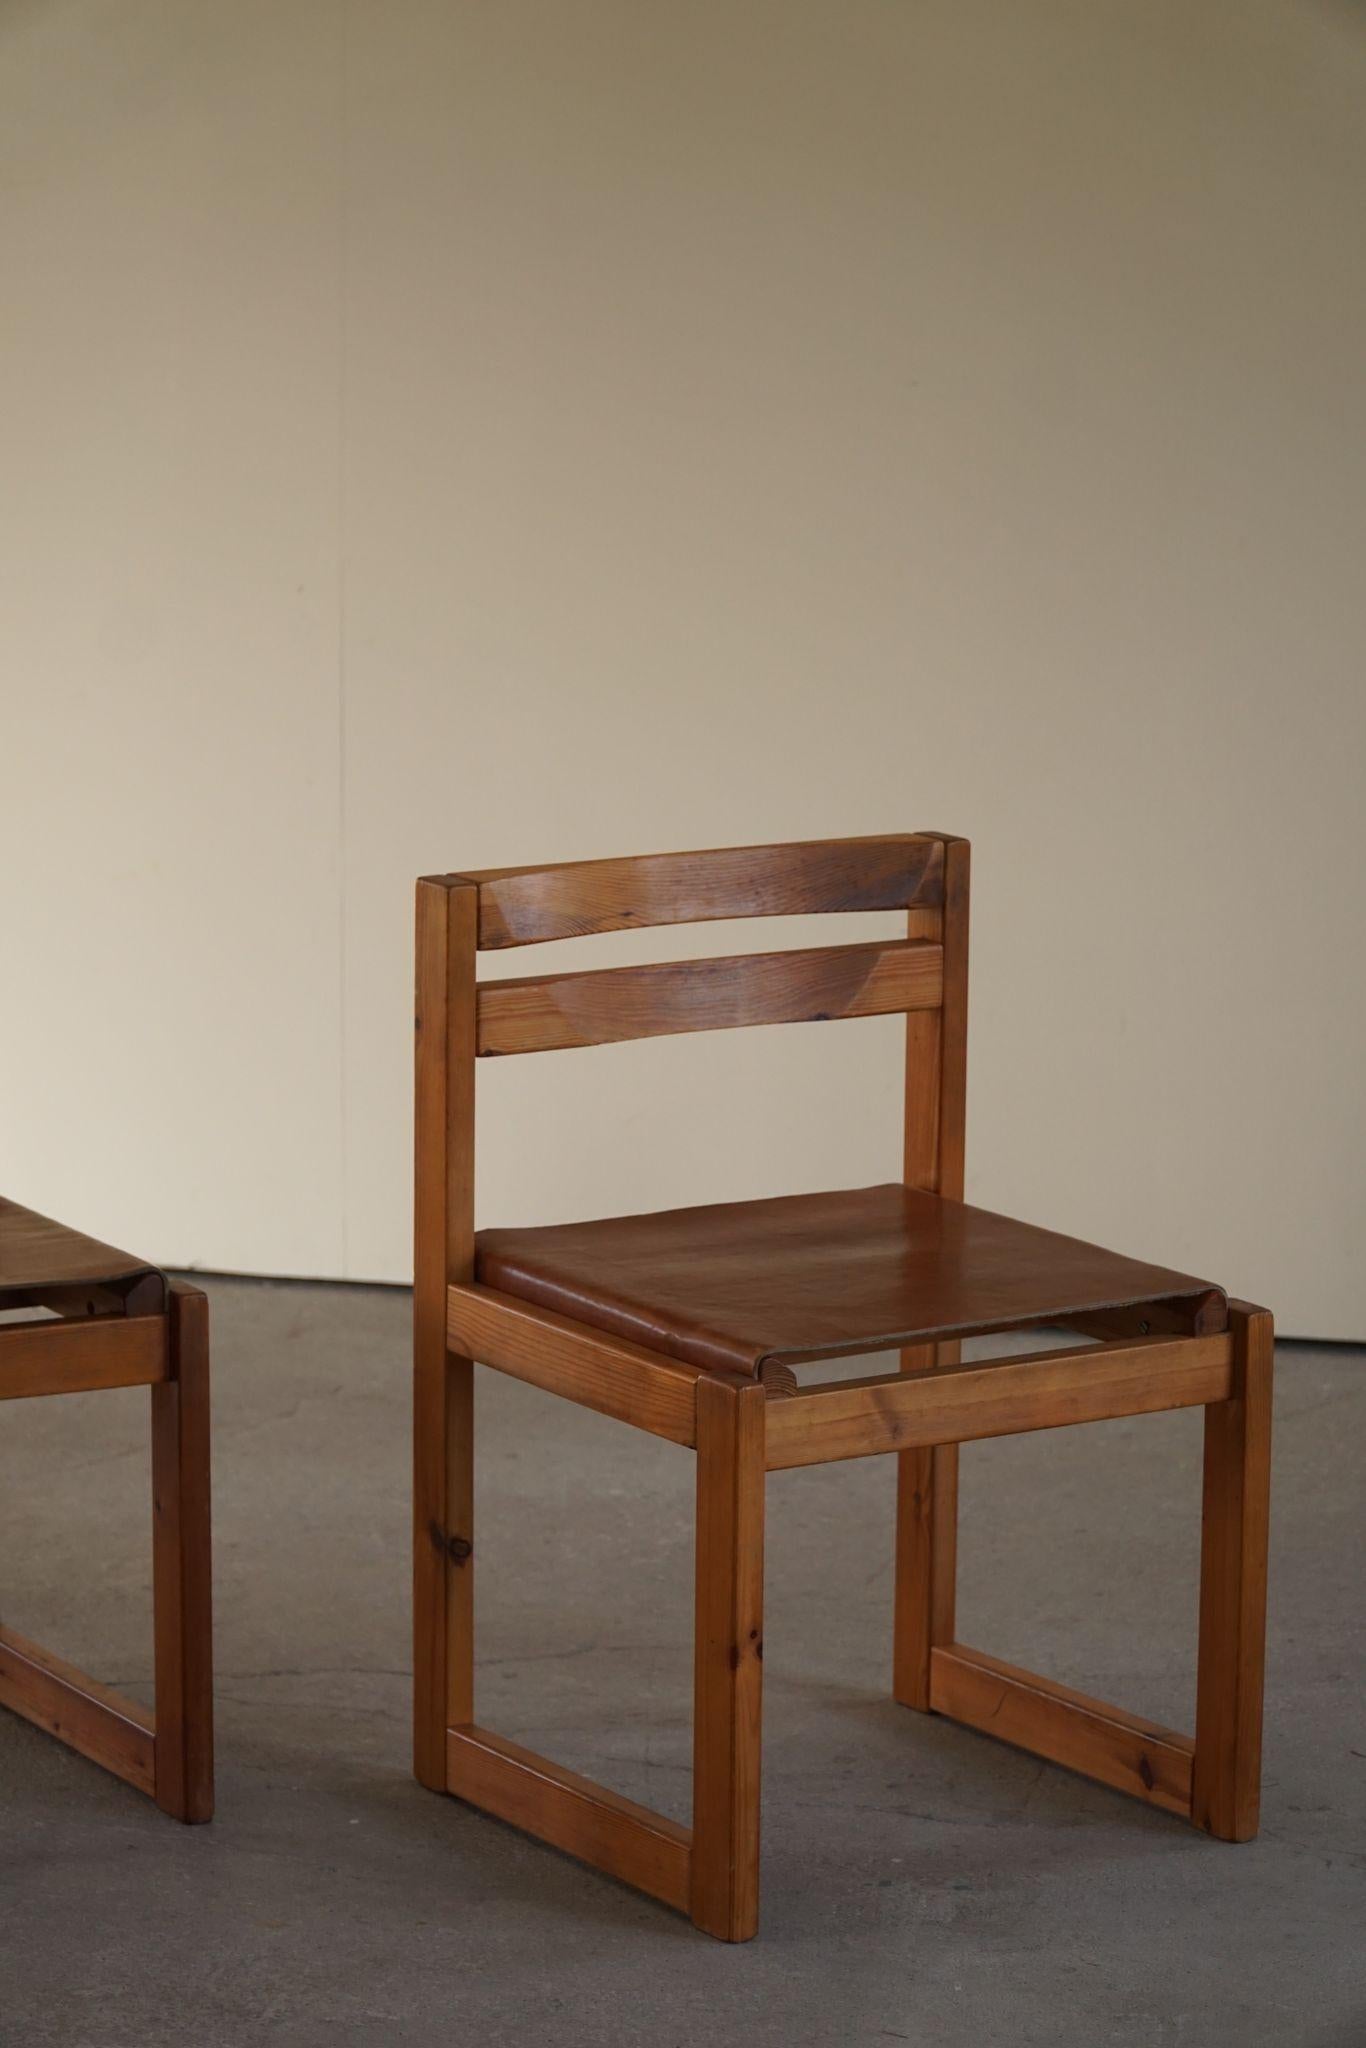 Set of 4, Danish Modern Dining Chairs in Pine and Leather, by Knud Færch, 1970s For Sale 6